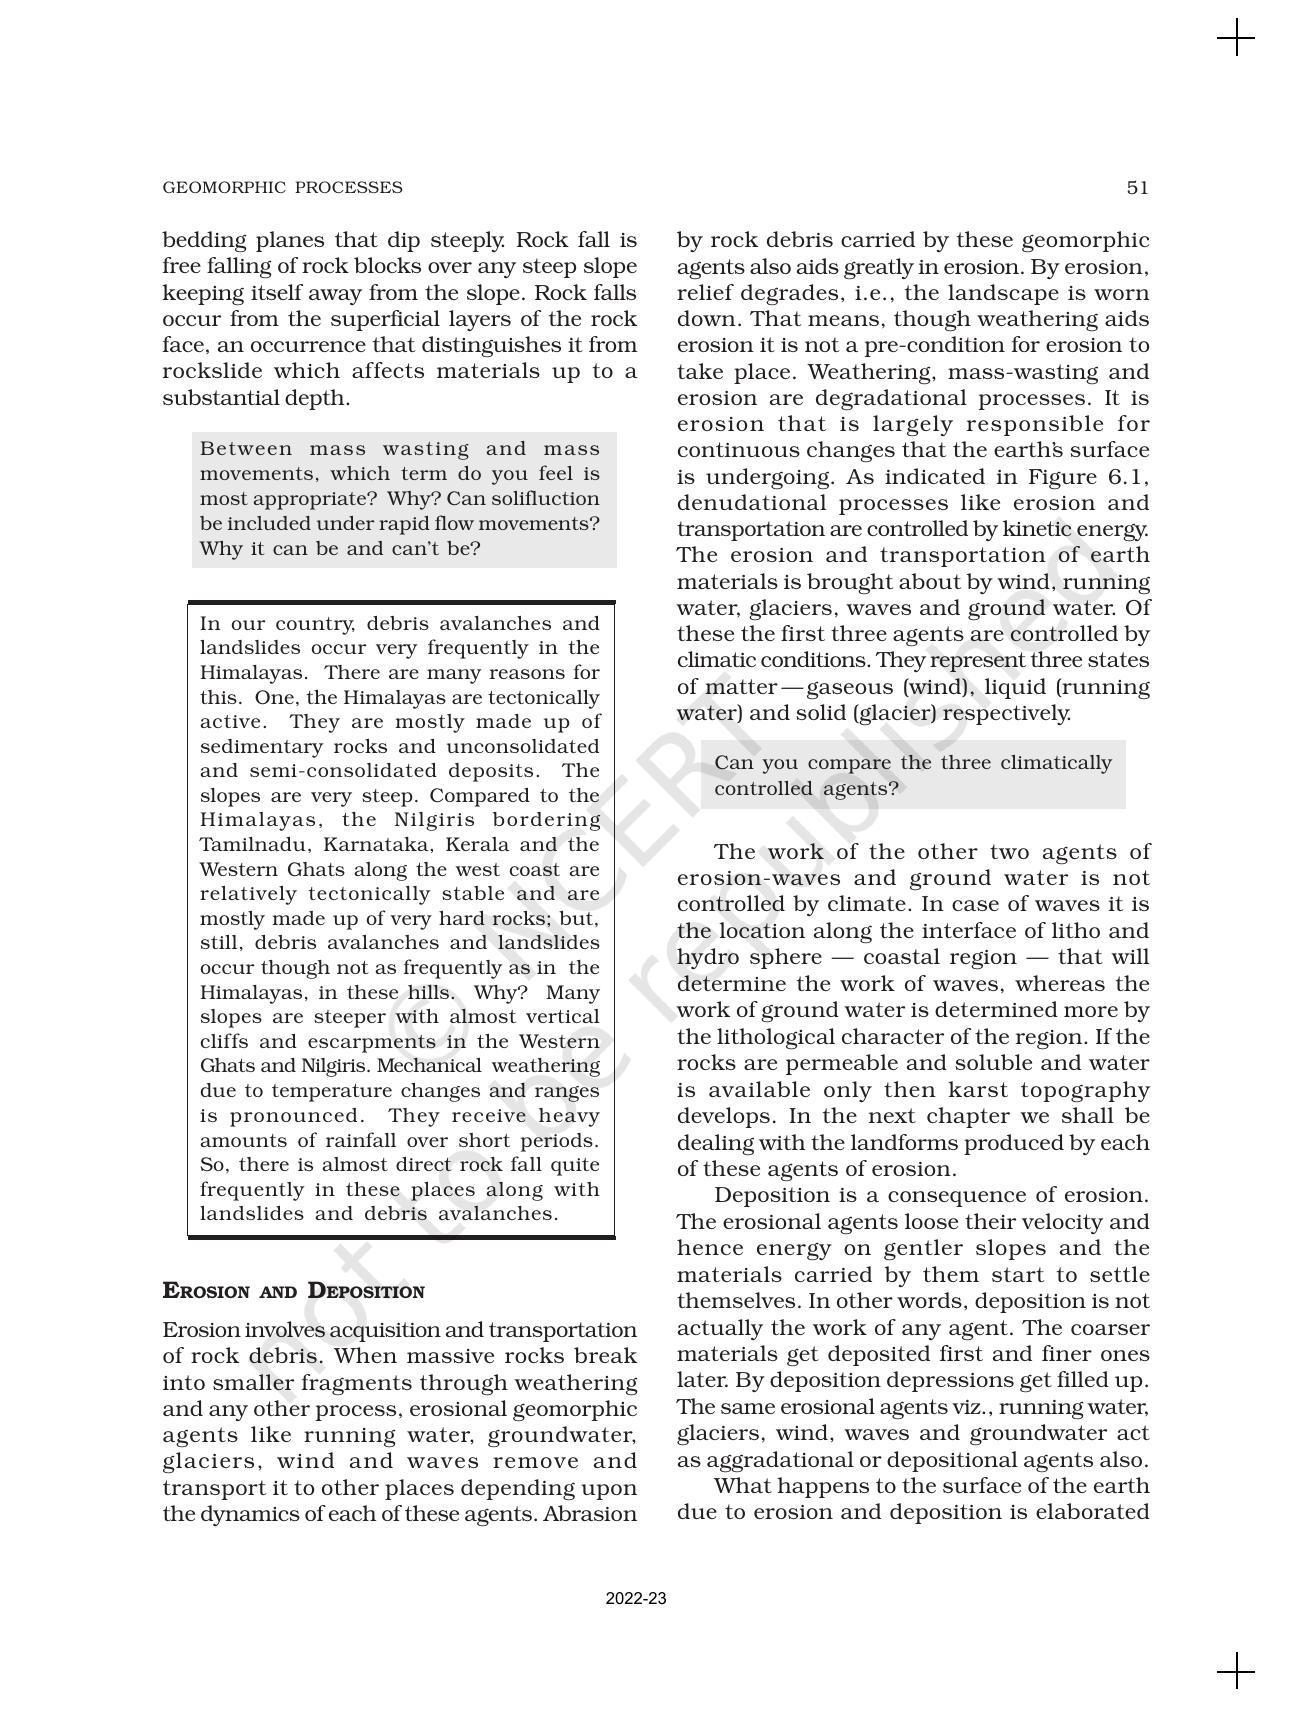 NCERT Book for Class 11 Geography (Part-I) Chapter 6 Geomorphic Processes - Page 7